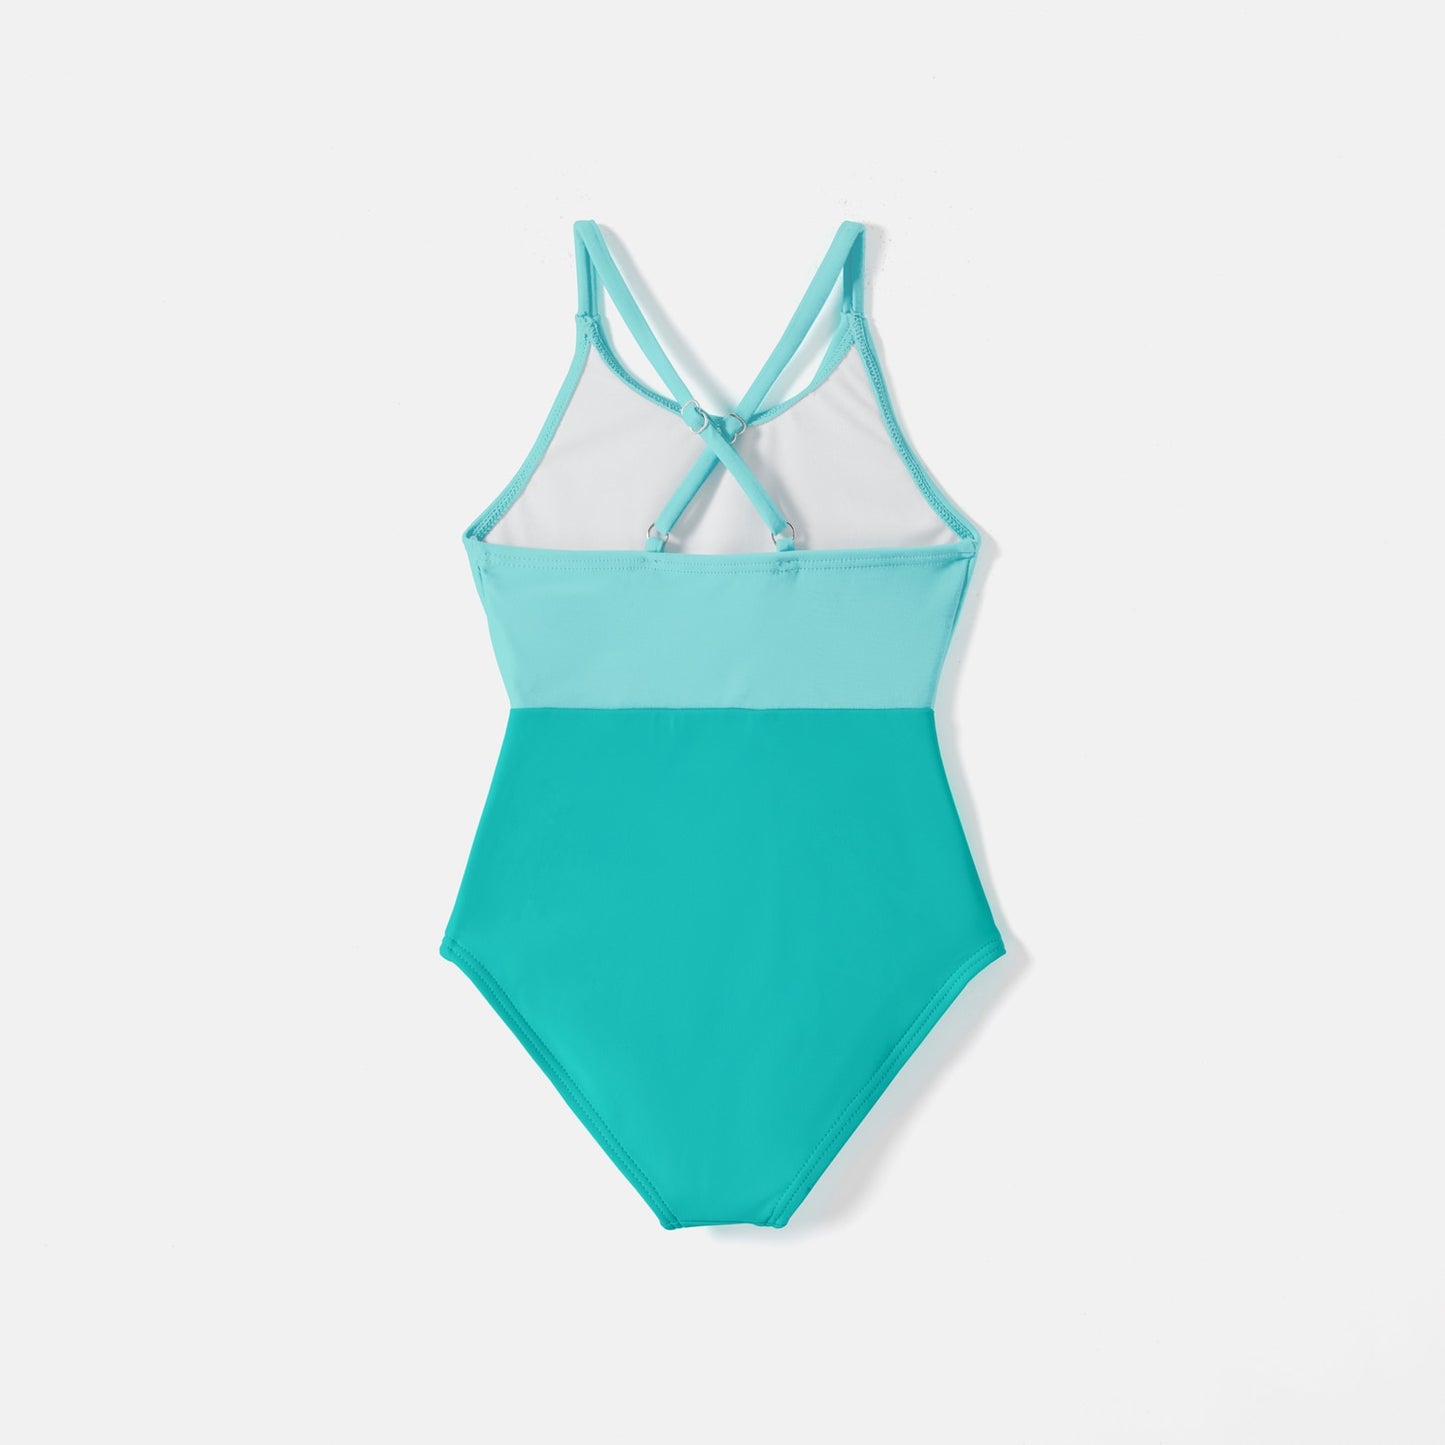 Family Matching Swimsuit Colorblock Front Tie Cut out One-piece Swimsuit and Swim Trunks - ChildAngle